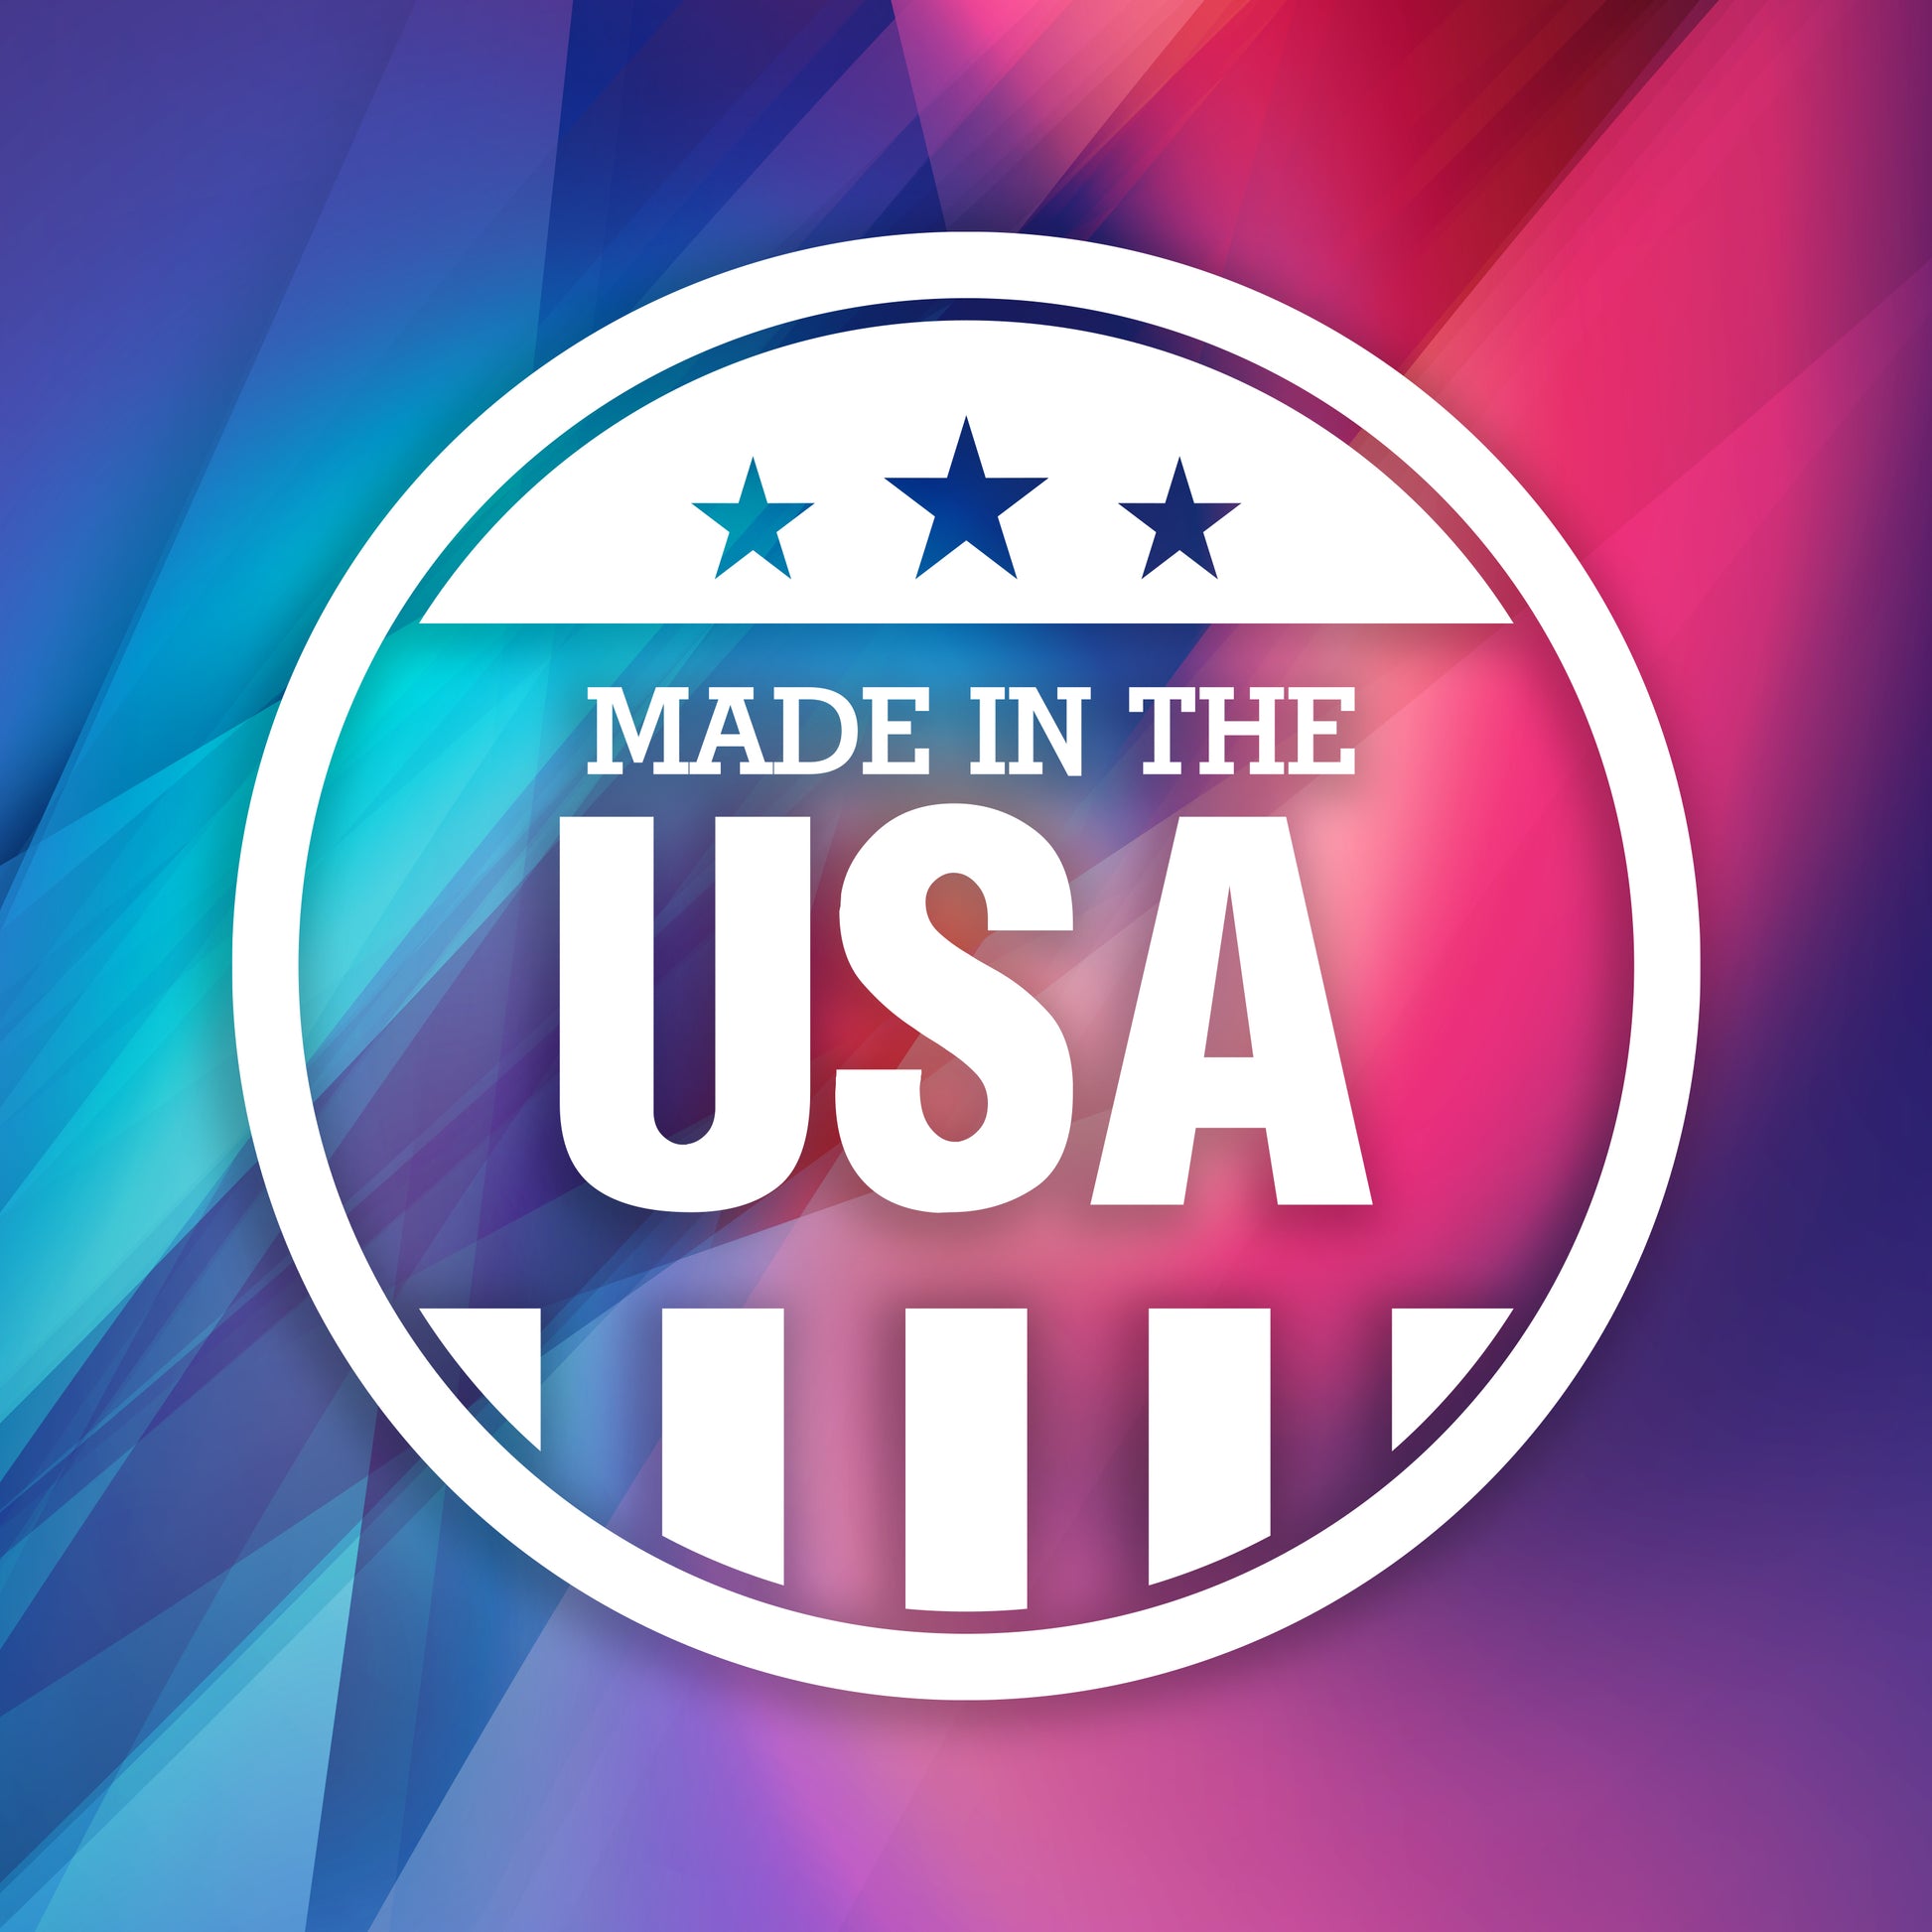 GetBranded decals are made in the USA